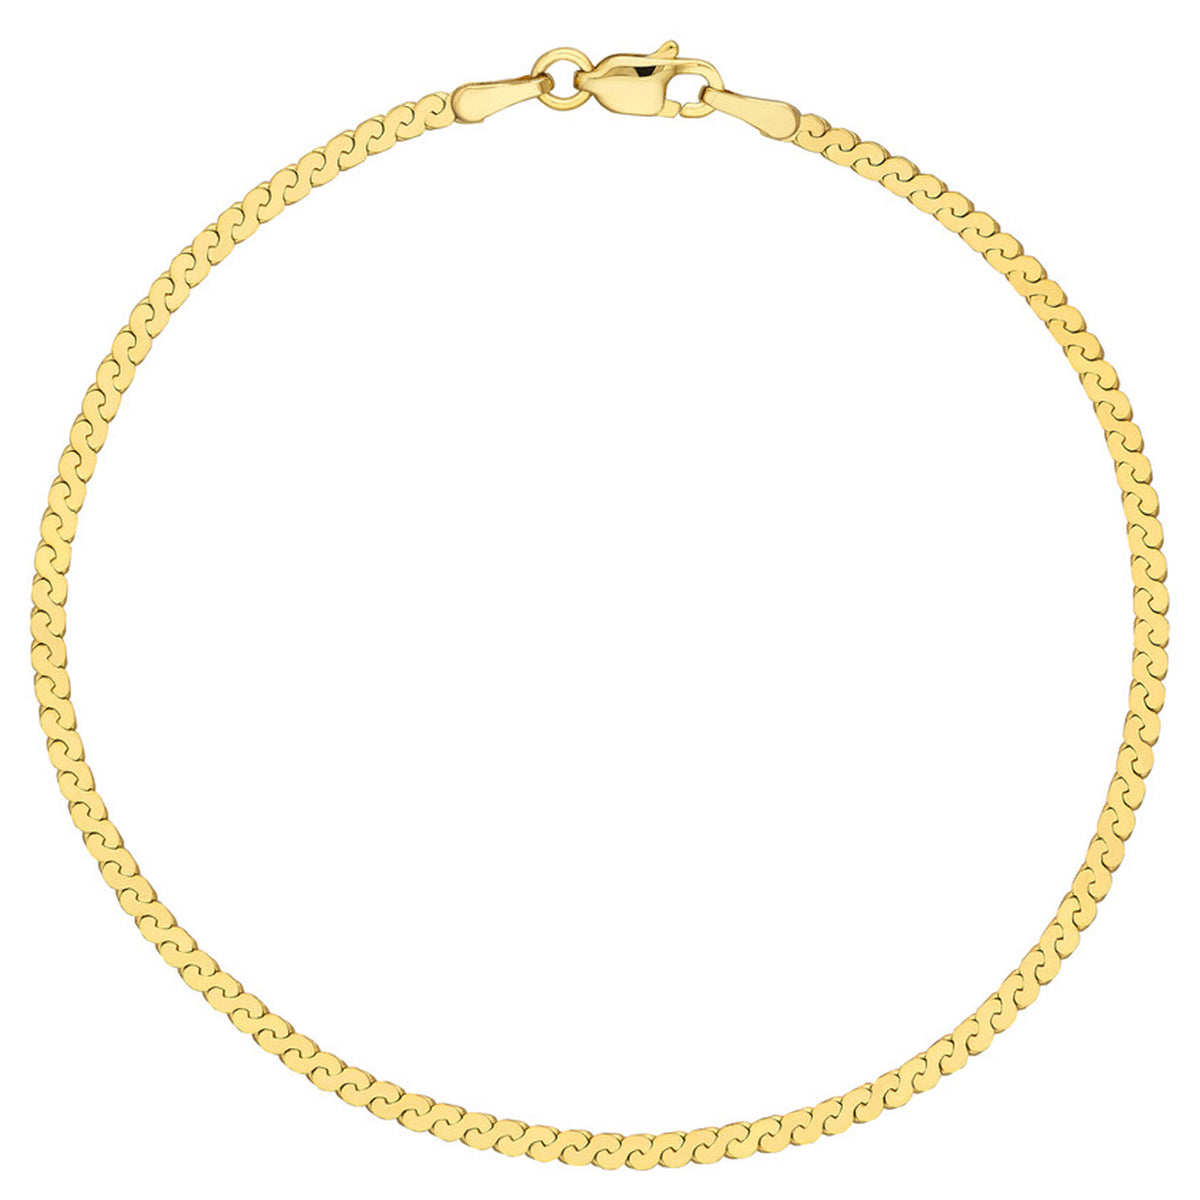 14K Yellow Gold 2mm Serpentine Chain Bracelet with Lobster Lock, 7.5 Inches